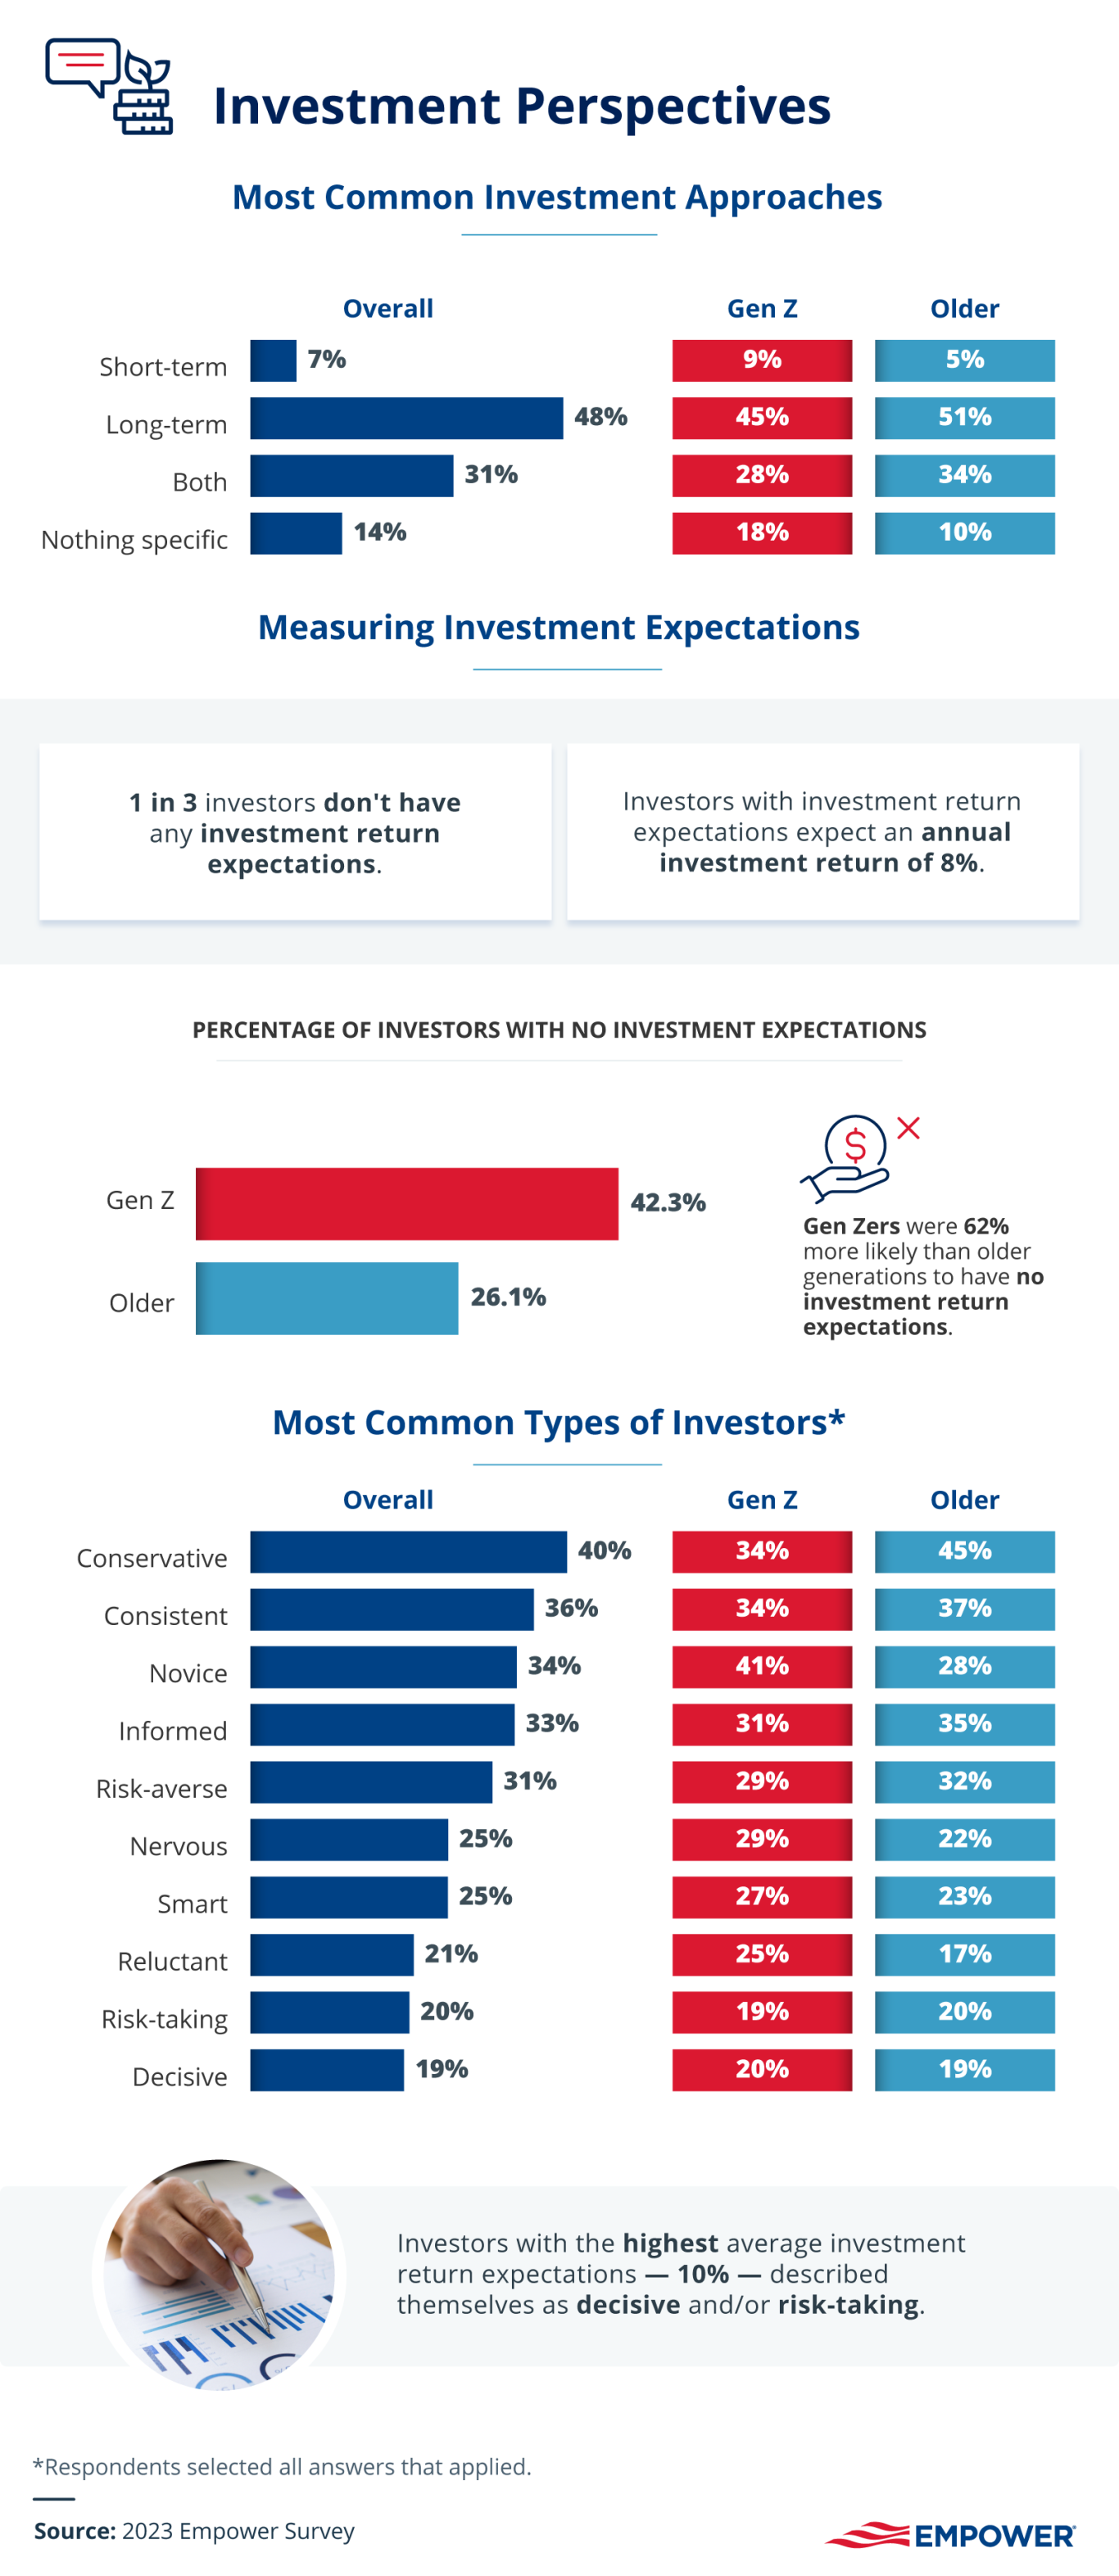 Data on investment perspectives